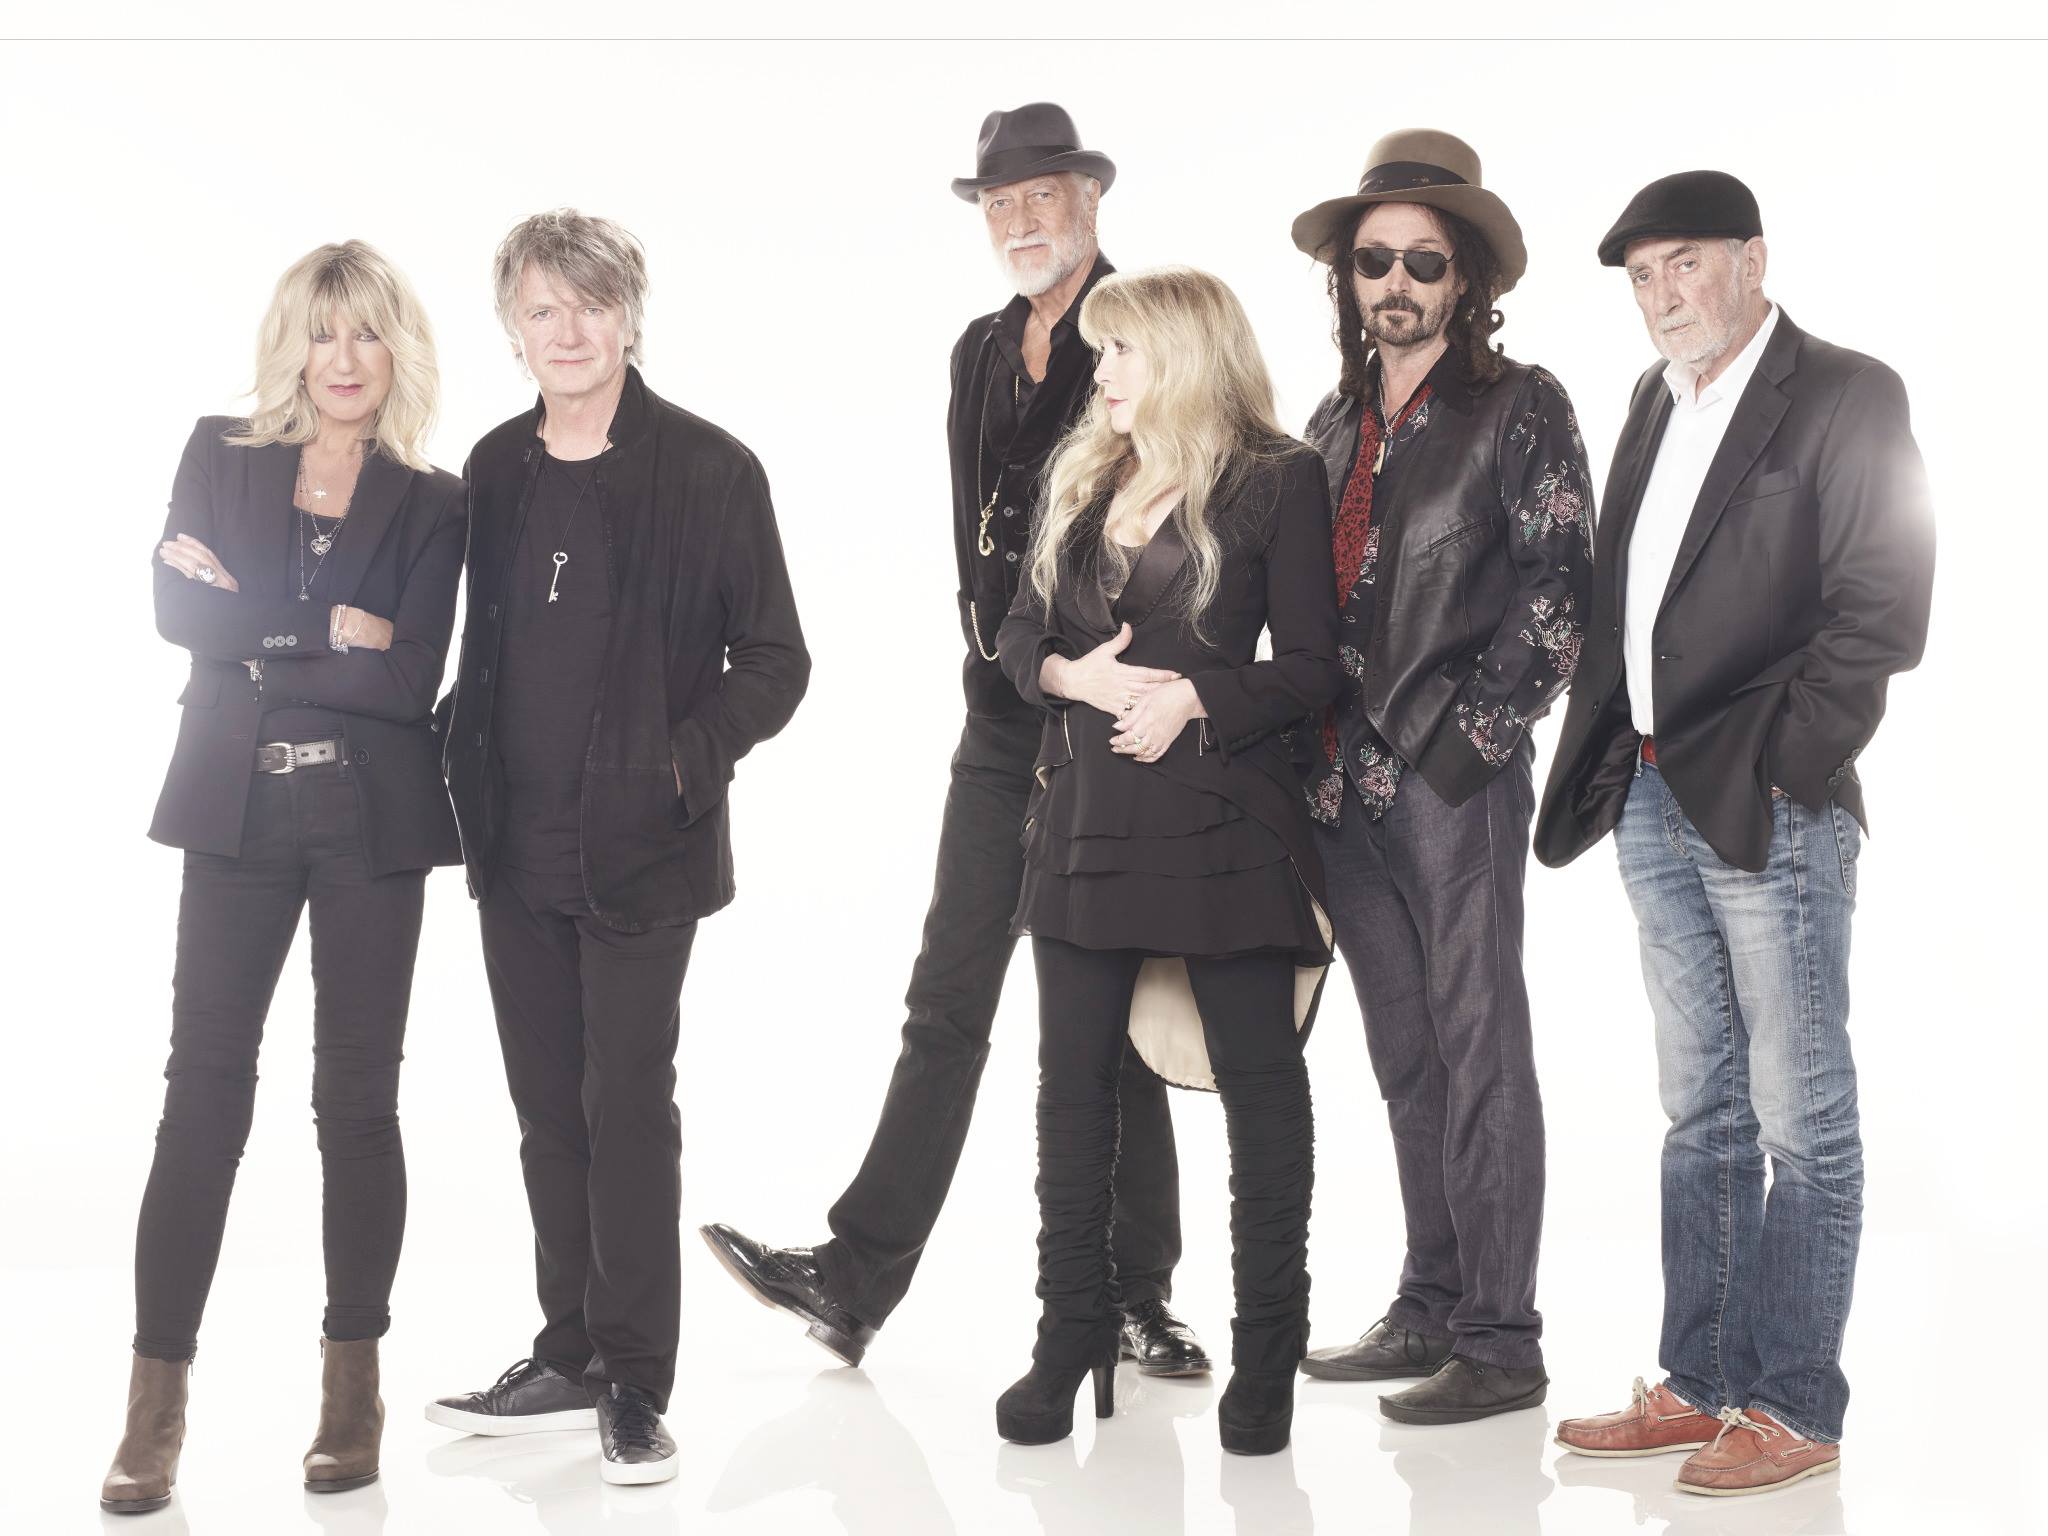 Fleetwood Mac News: REVIEW and VIDEO Fleetwood Mac Live in St. Louis  October 20, 2018